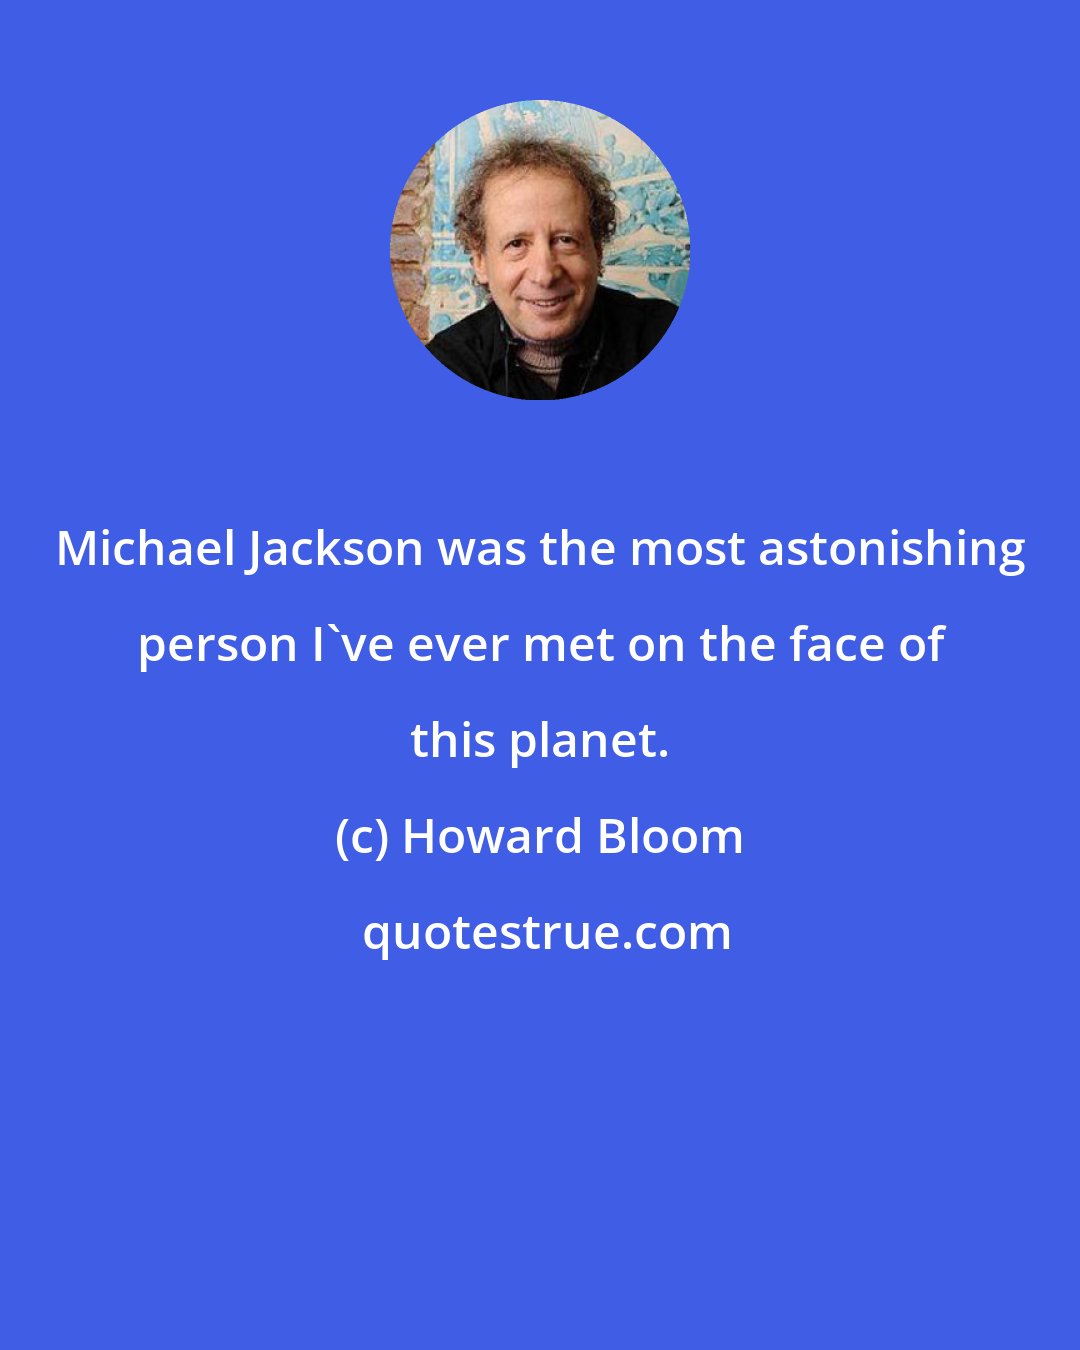 Howard Bloom: Michael Jackson was the most astonishing person I've ever met on the face of this planet.